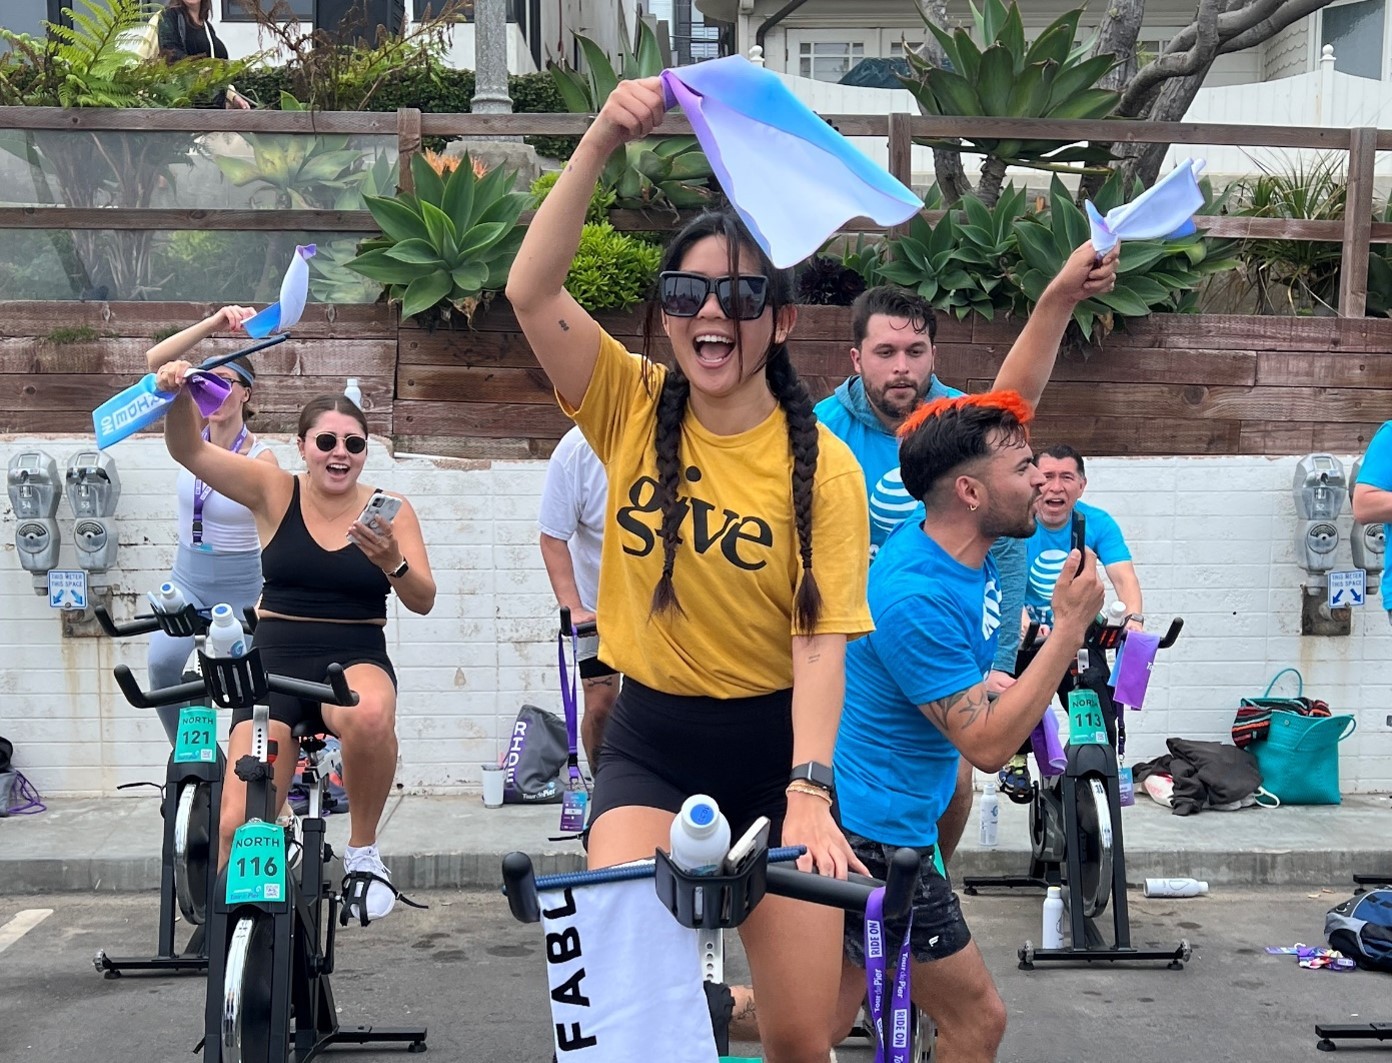 One our Chiefs of Staff representing GIVE (Fabletics' philanthropic group) at Tour de Pier, a charity ride for cancer